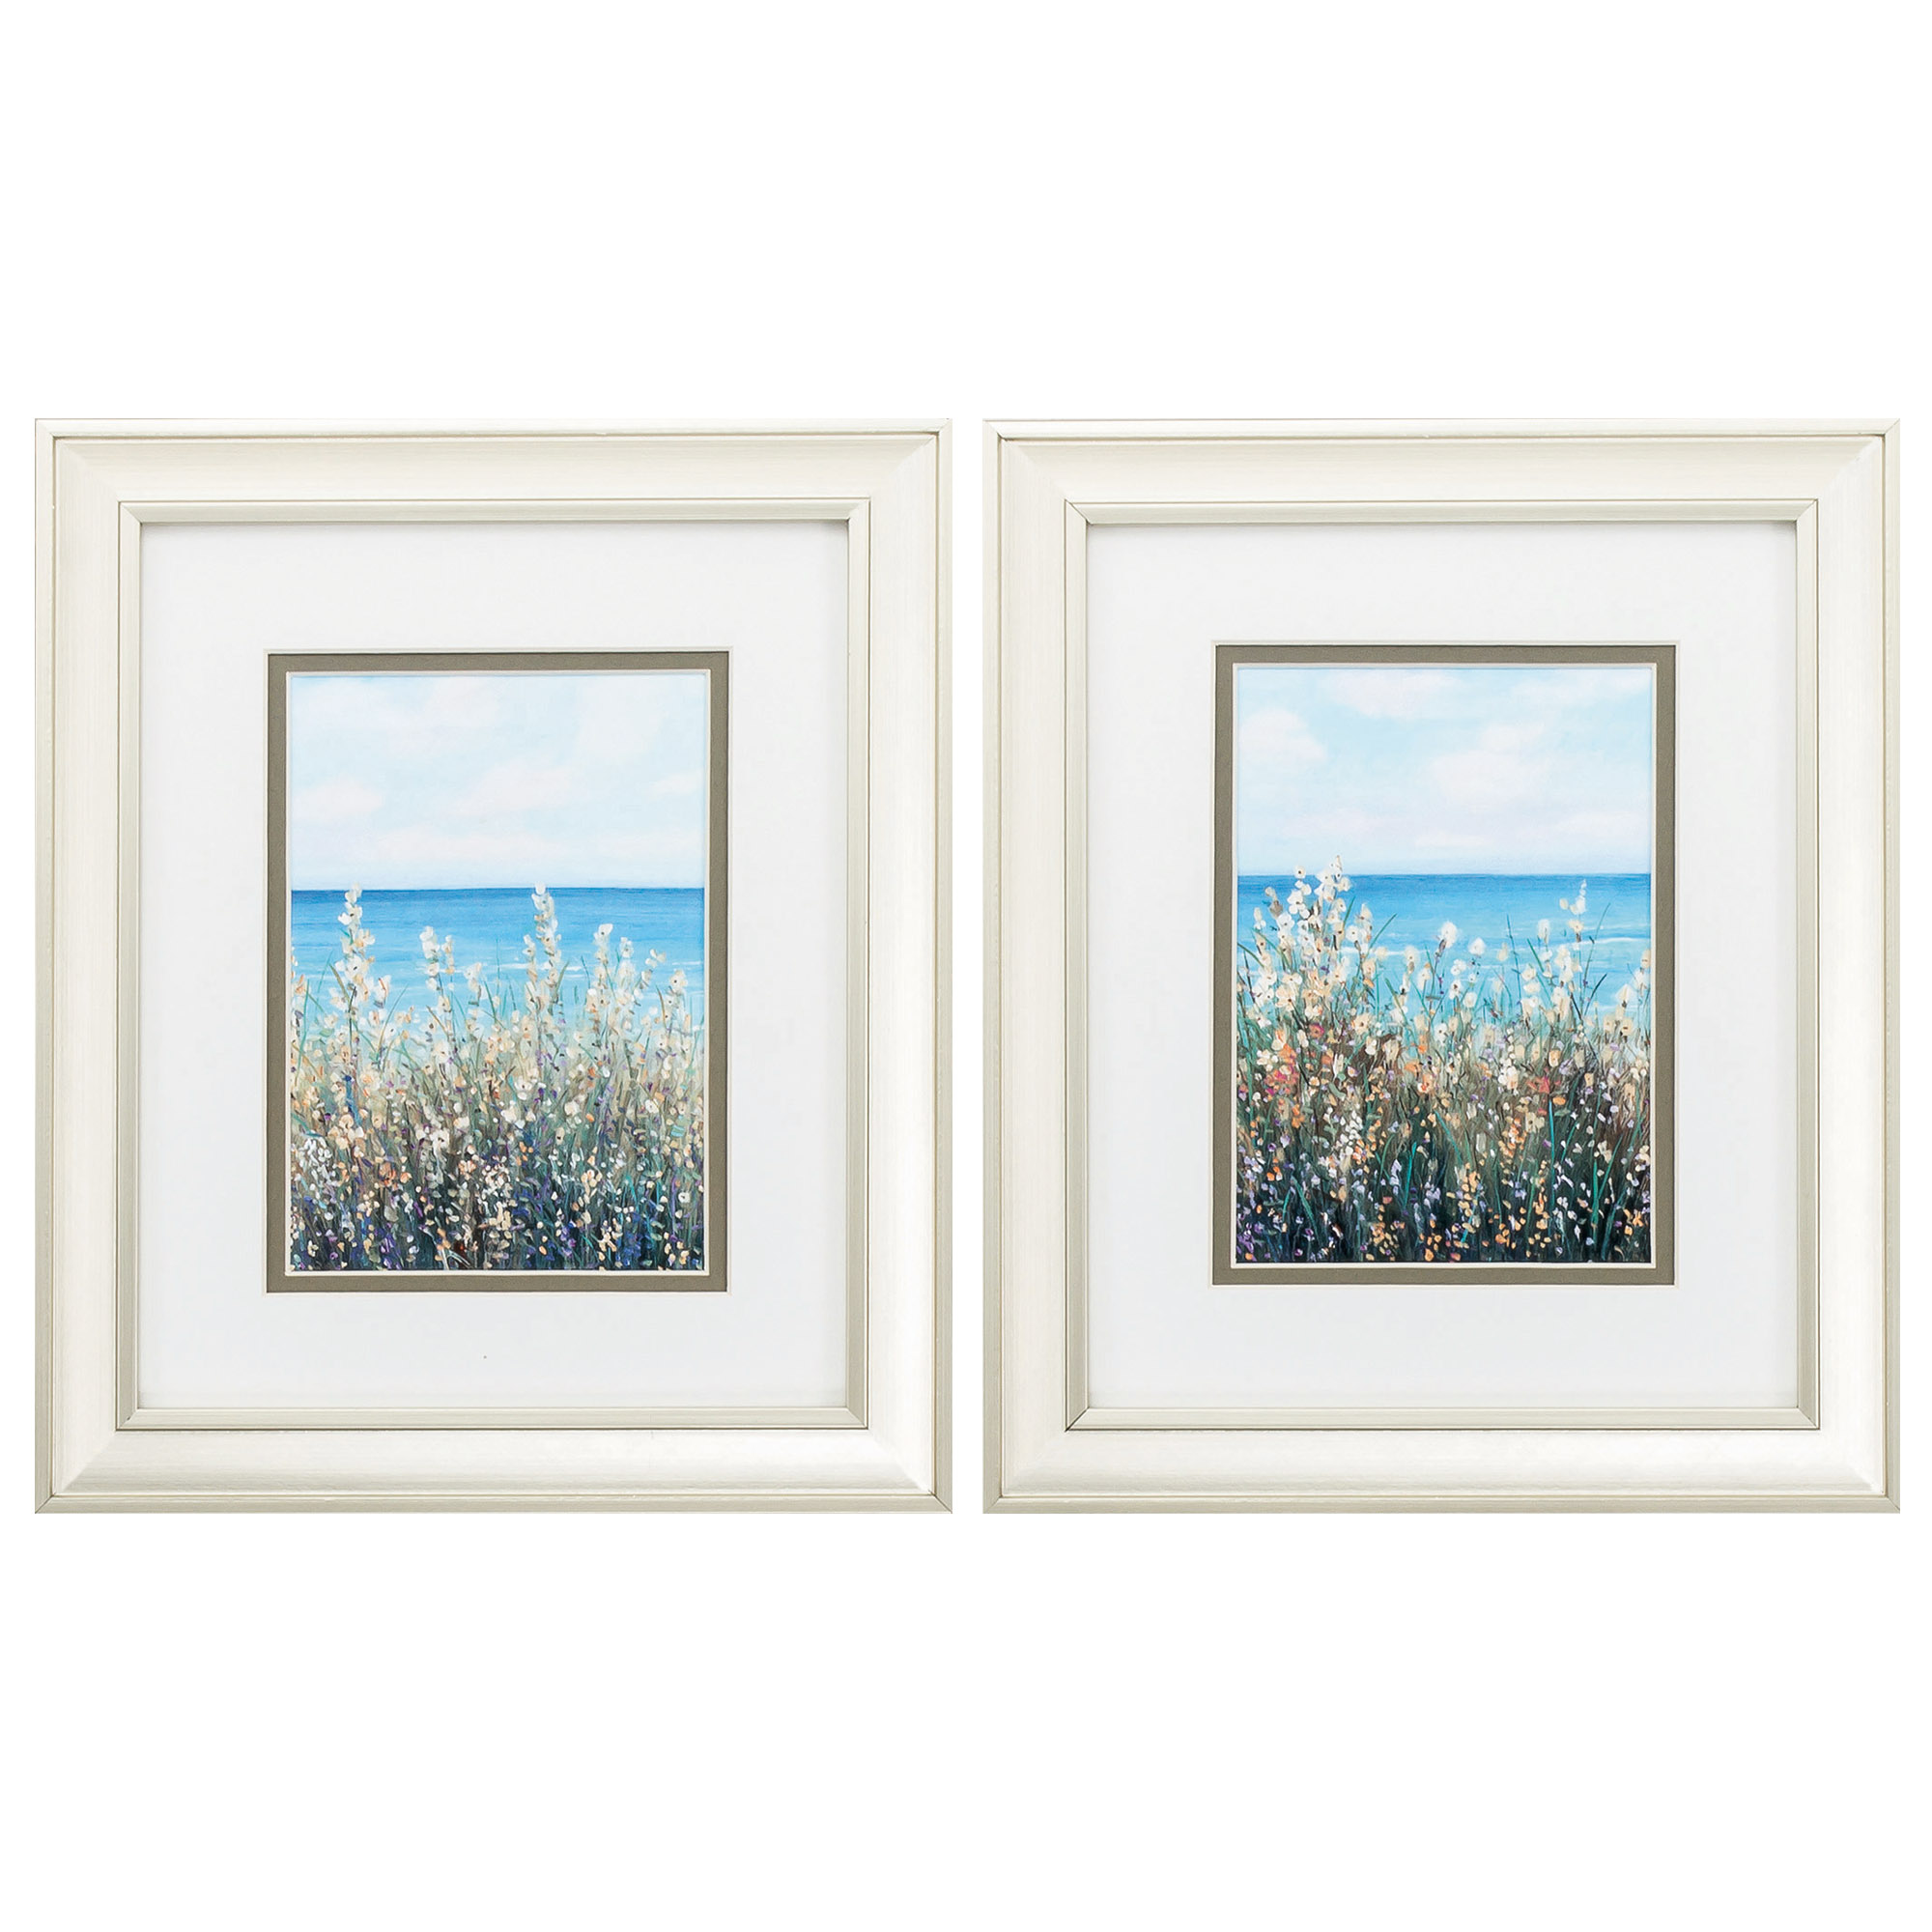 10" X 12" Champagne Gold Color Frame Flowers At The Coast (Set of 2)